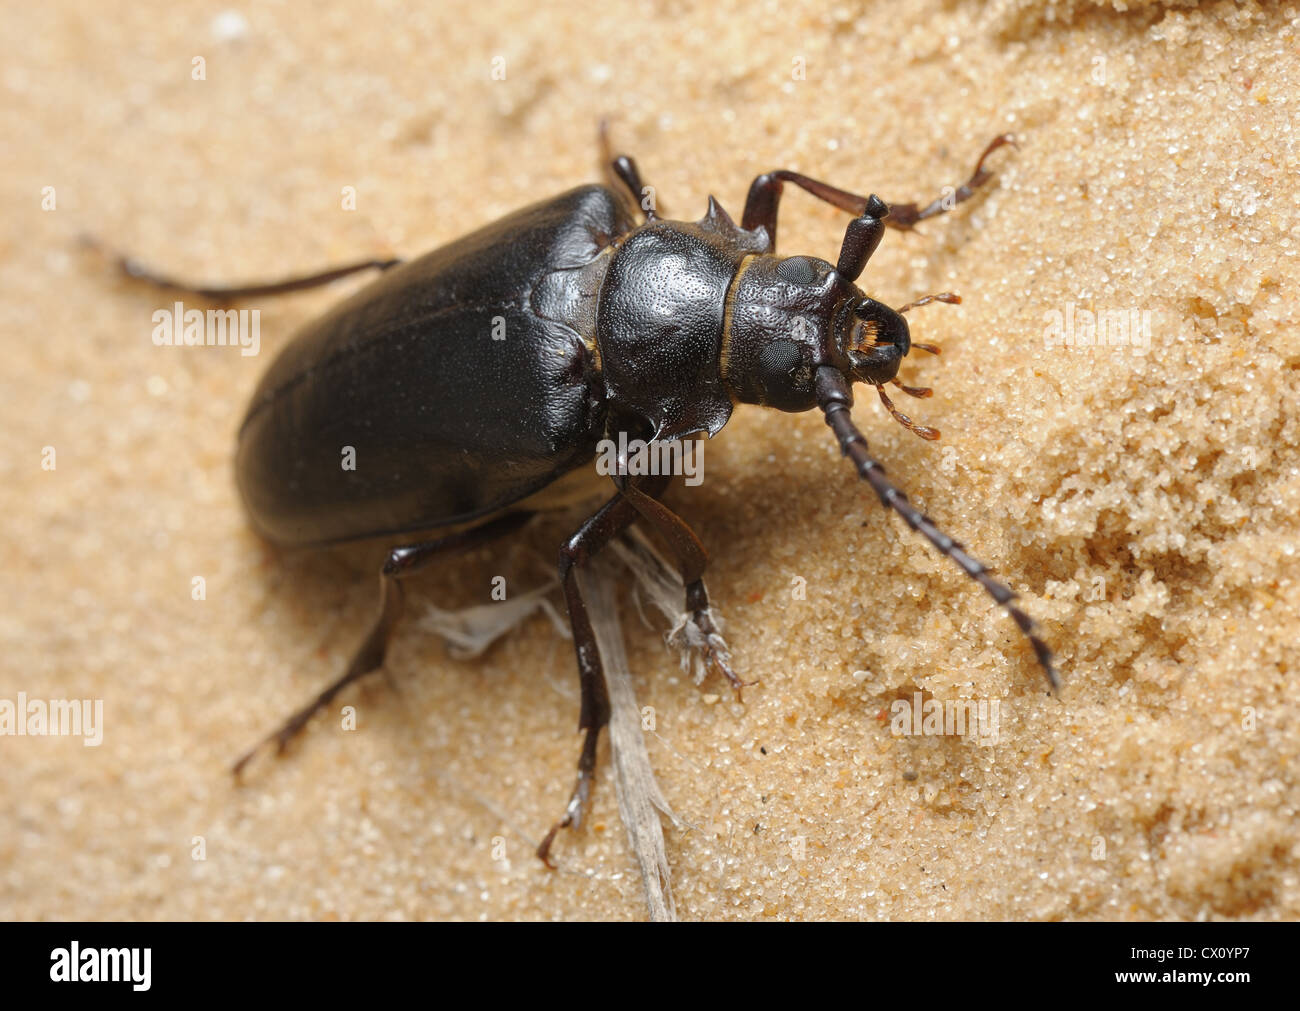 Large brown longhorn beetle on the sand in Israel Stock Photo